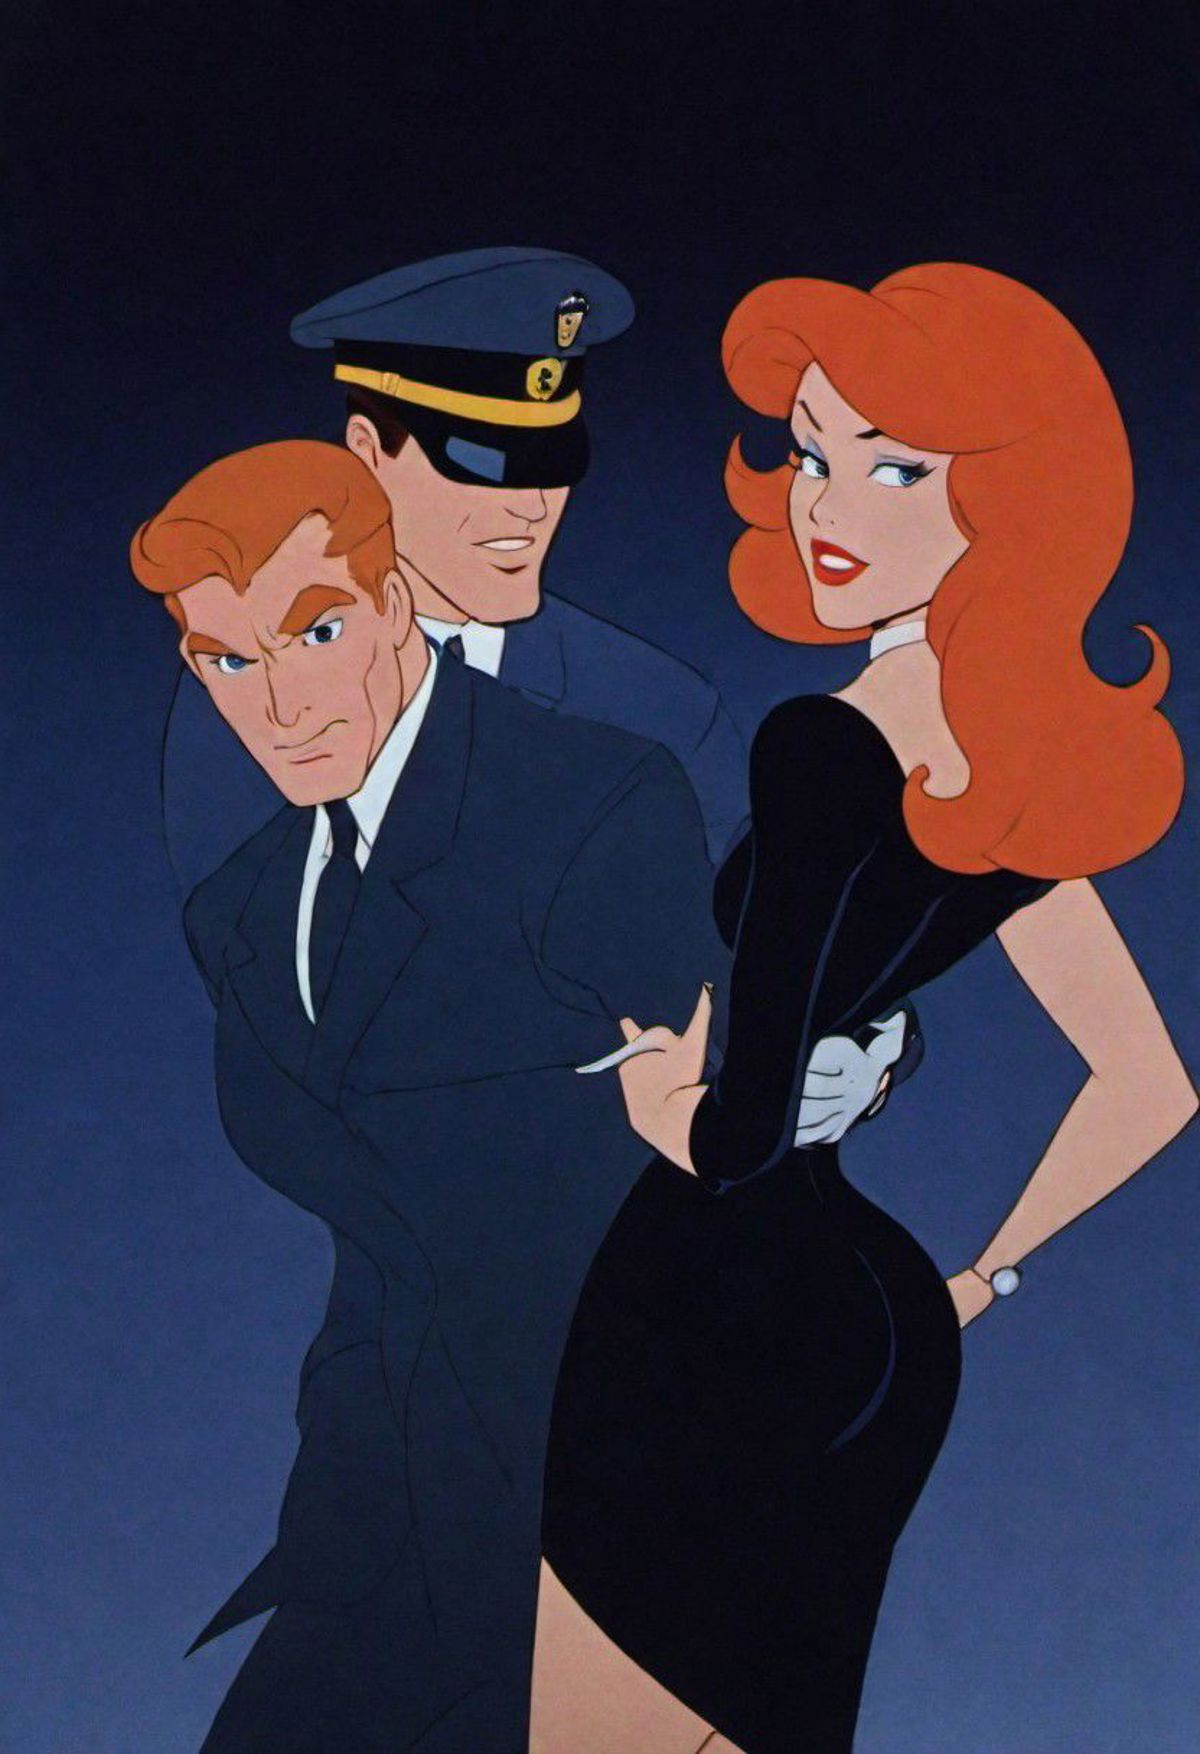 The image is a cartoon featuring a man and a woman, both wearing black clothing. The man is wearing a tie, and the woman appears to be wearing a black dress. They are standing next to each other, possibly posing for a picture. The woman seems to be holding onto the man's arm or hand, creating an intimate and friendly atmosphere. The scene is set in a dark environment, which adds a sense of mystery and intrigue to the image.